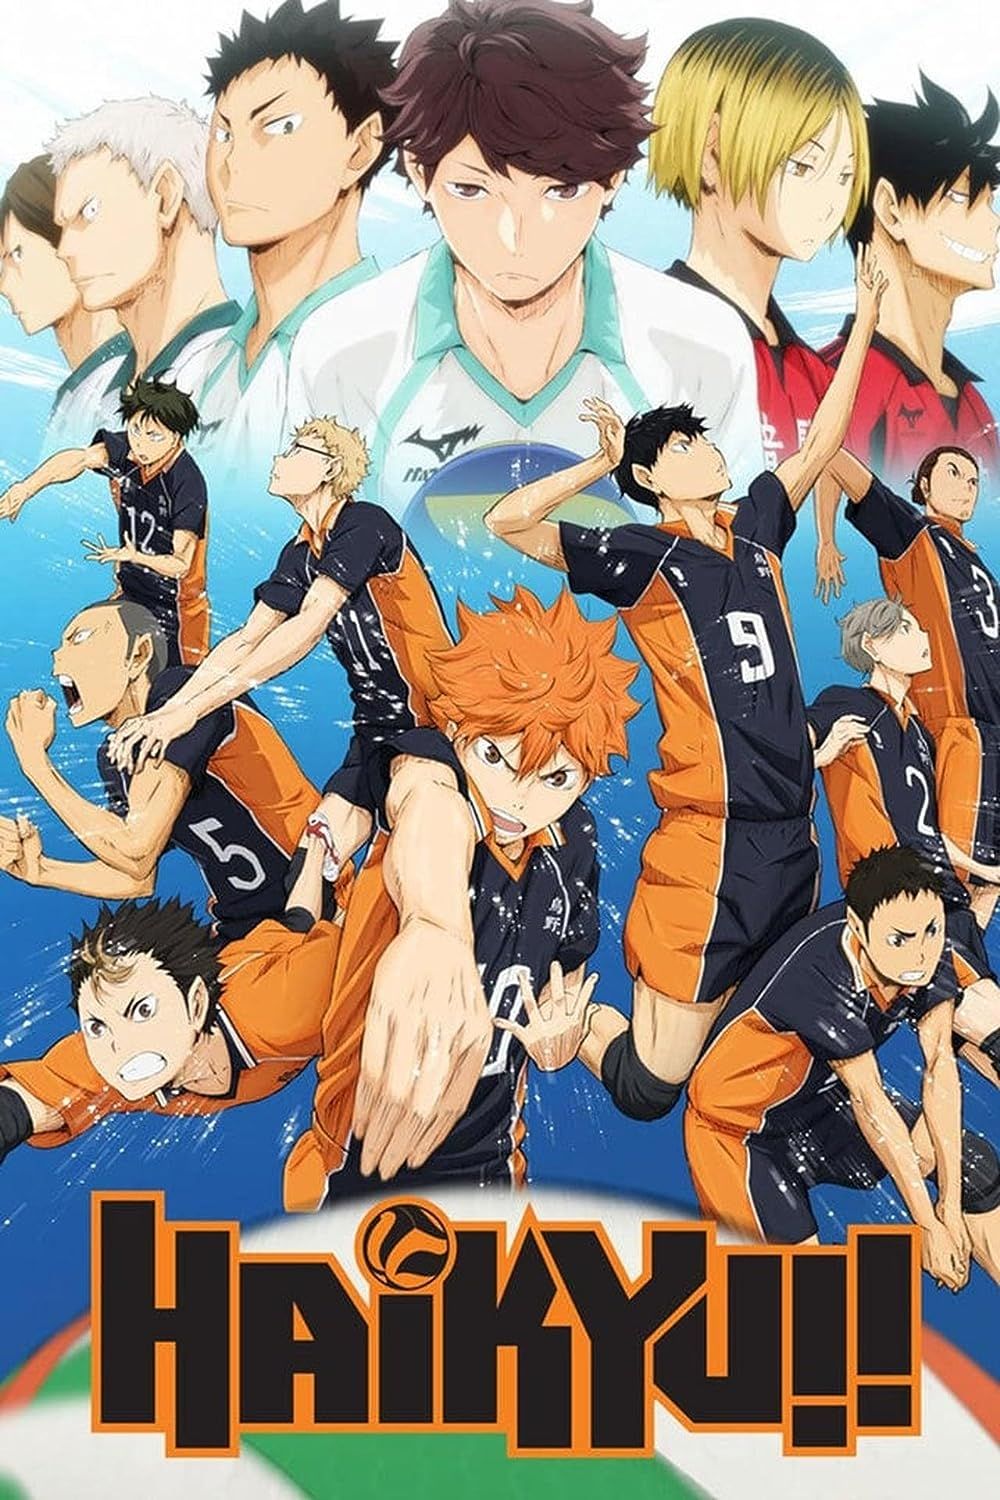 10 Things Fans Want To See In The New Haikyuu! Movies